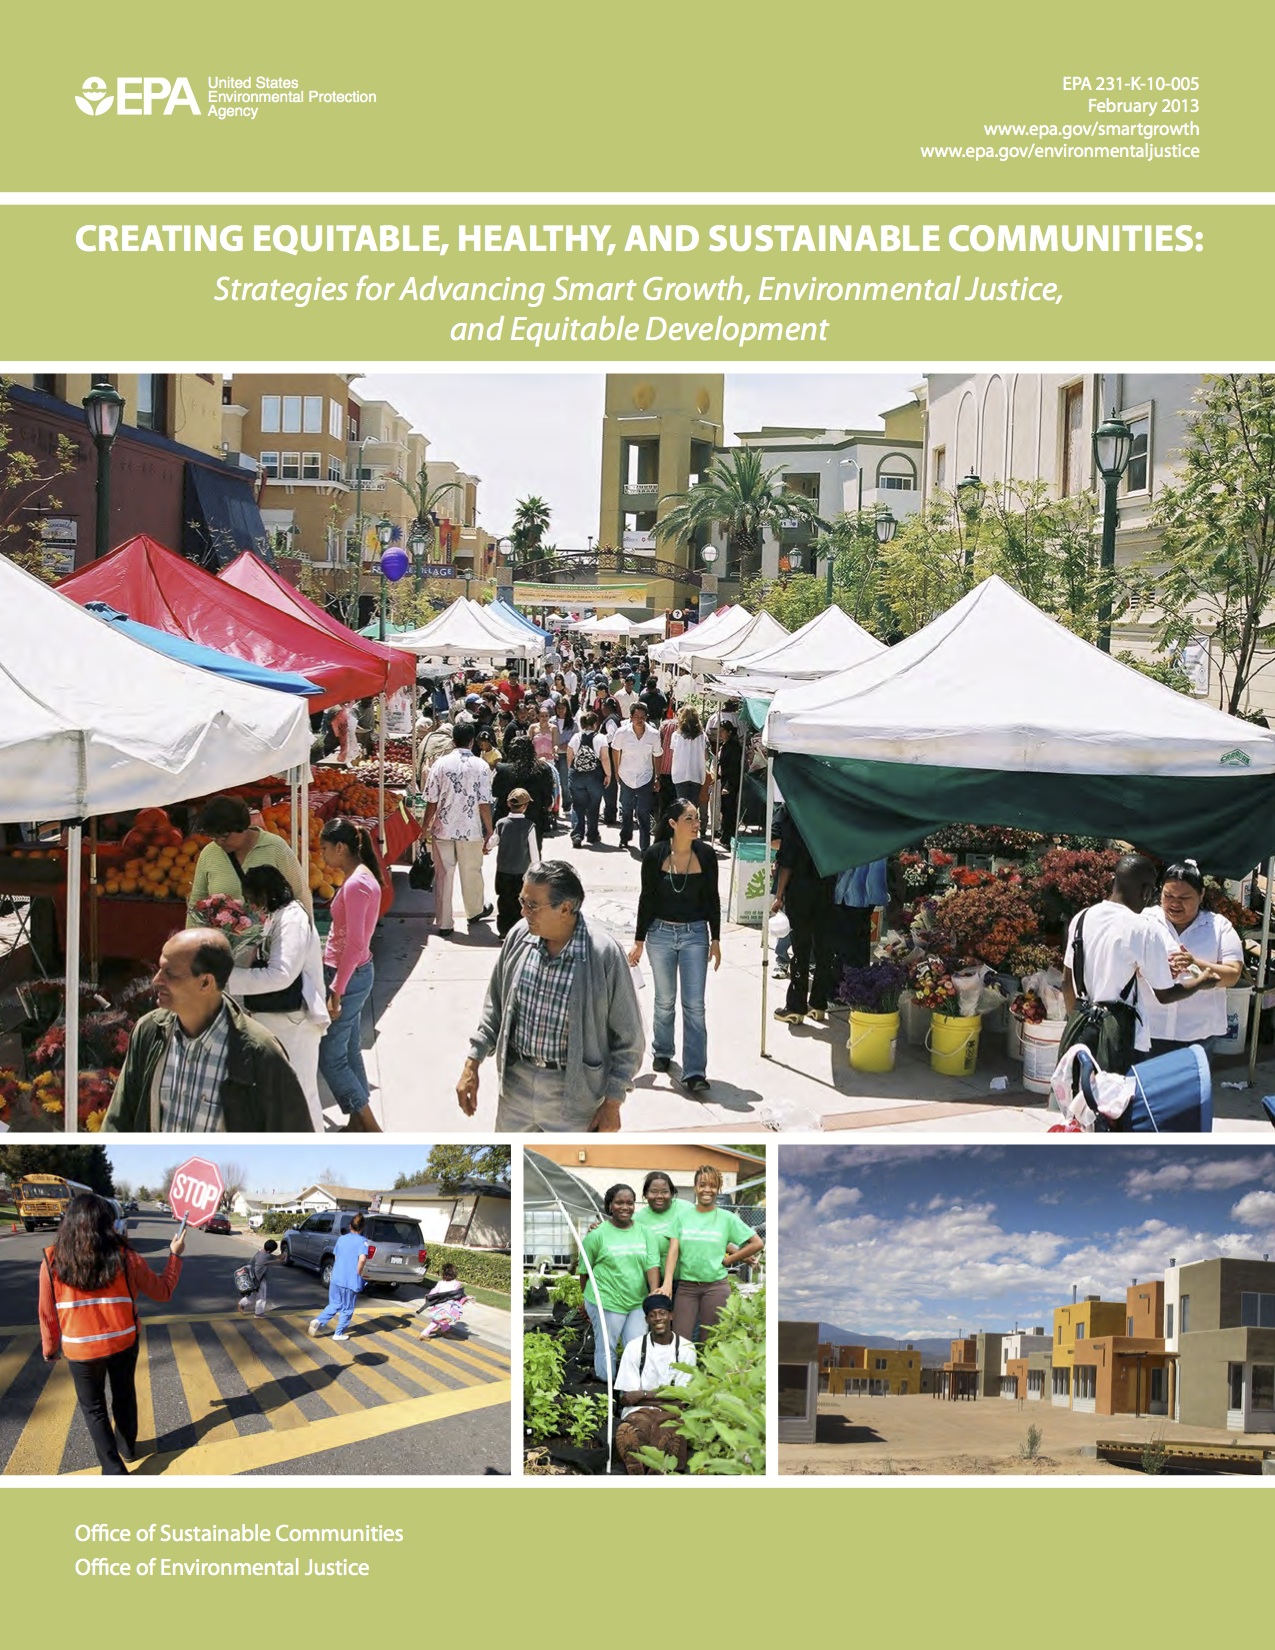 Creating Equitable, Healthy, and Sustainable Communities: Strategies for Advancing Smart Growth, Environmental Justice, and Equitable Development